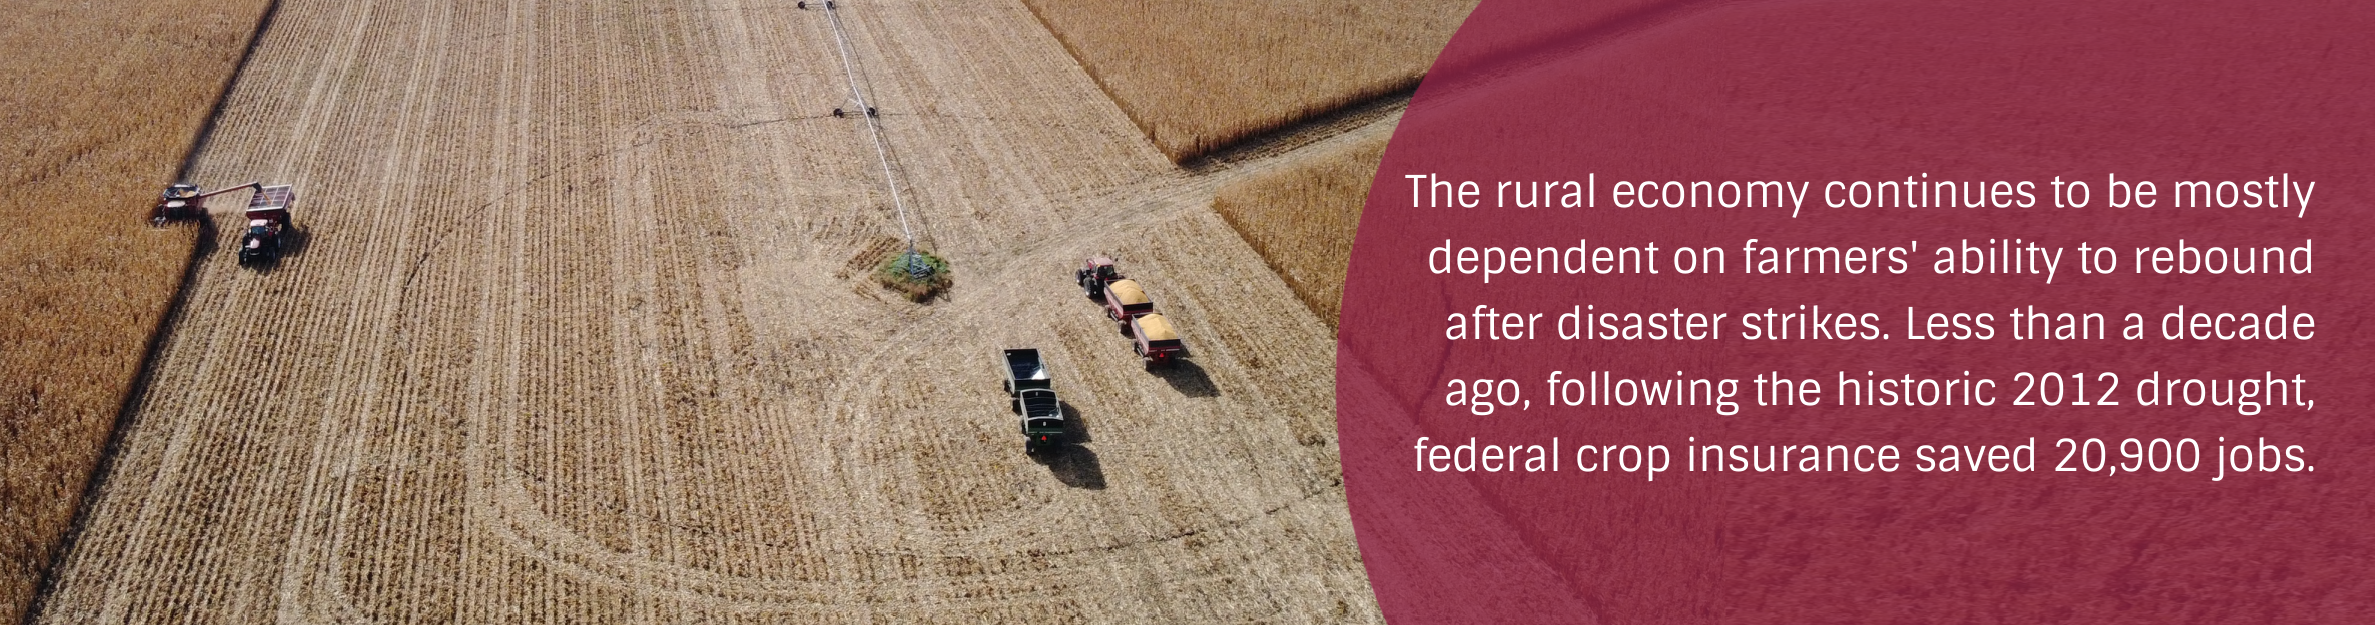 Photo: Harvest
Text: The rural economy continues to be mostly dependent on farmers' ability to rebound after disaster strikes. Less than a decade ago, following the historic 2012 drought, federal crop insurance saved 20,900 jobs.